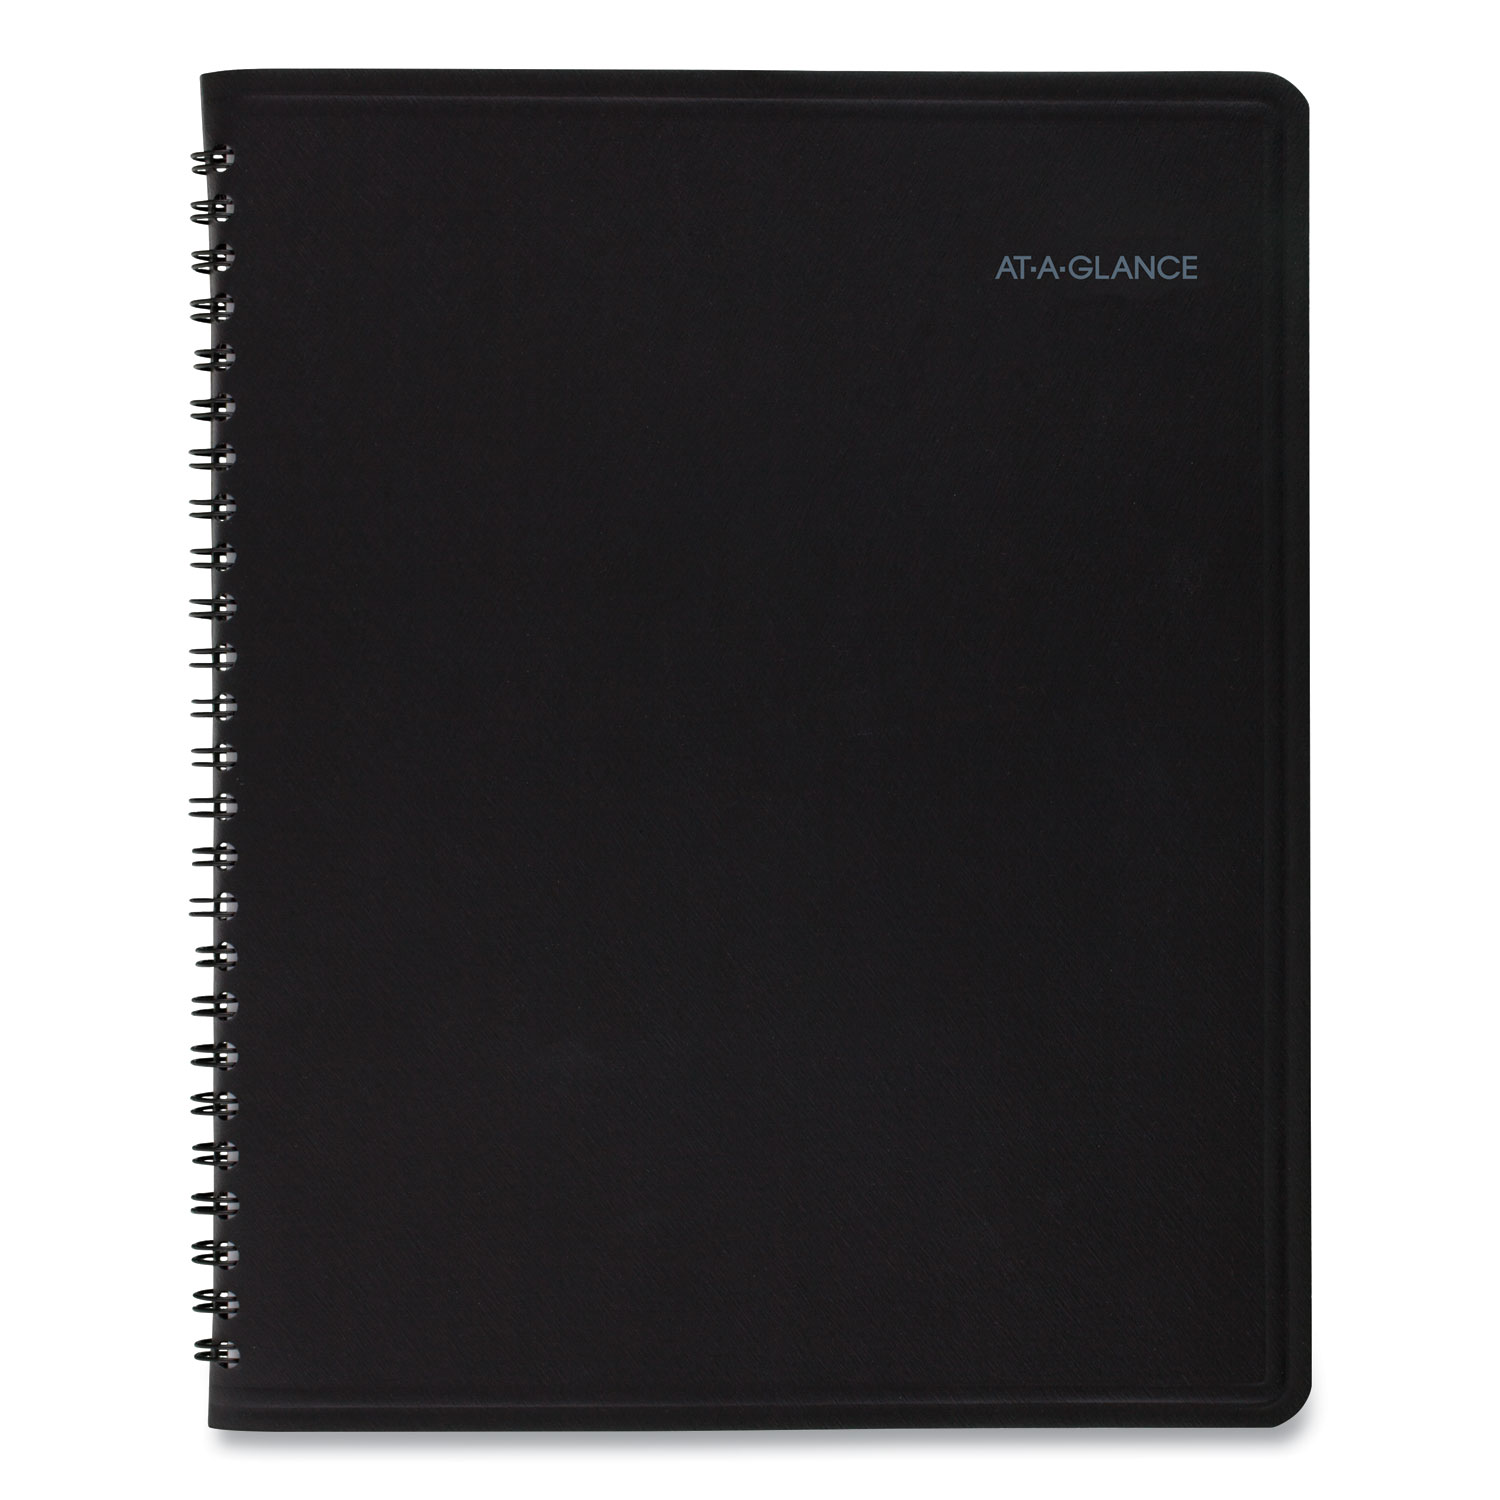  AT-A-GLANCE 760805 QuickNotes Monthly Planner, 8 3/4 x 6 7/8, Black, 2020 (AAG760805) 